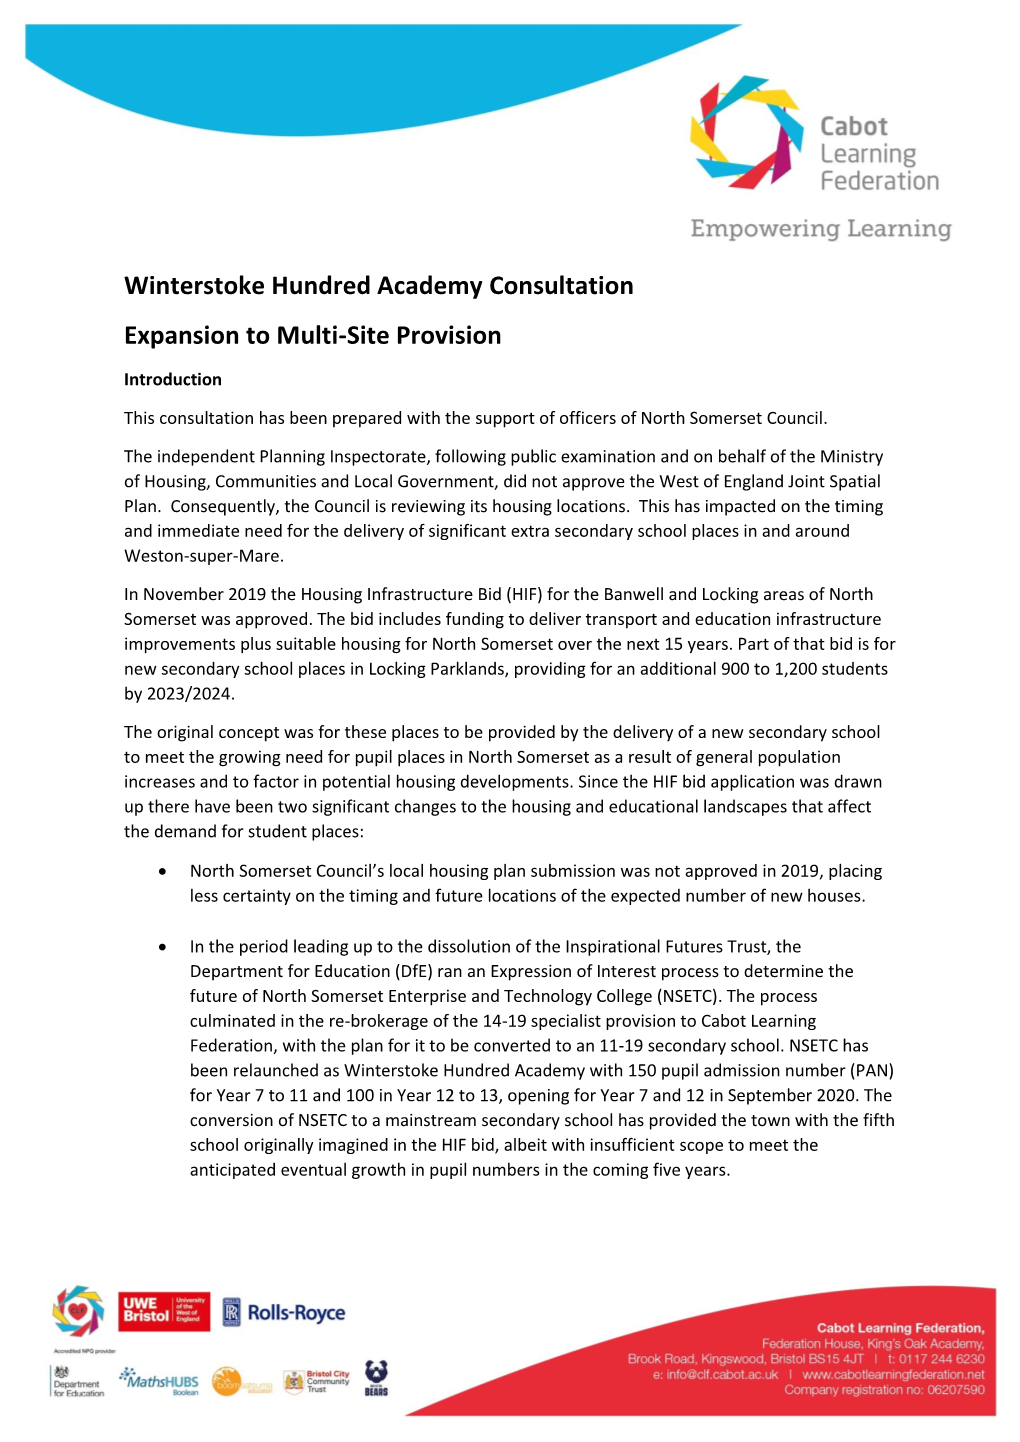 Winterstoke Hundred Academy Consultation Expansion to Multi-Site Provision